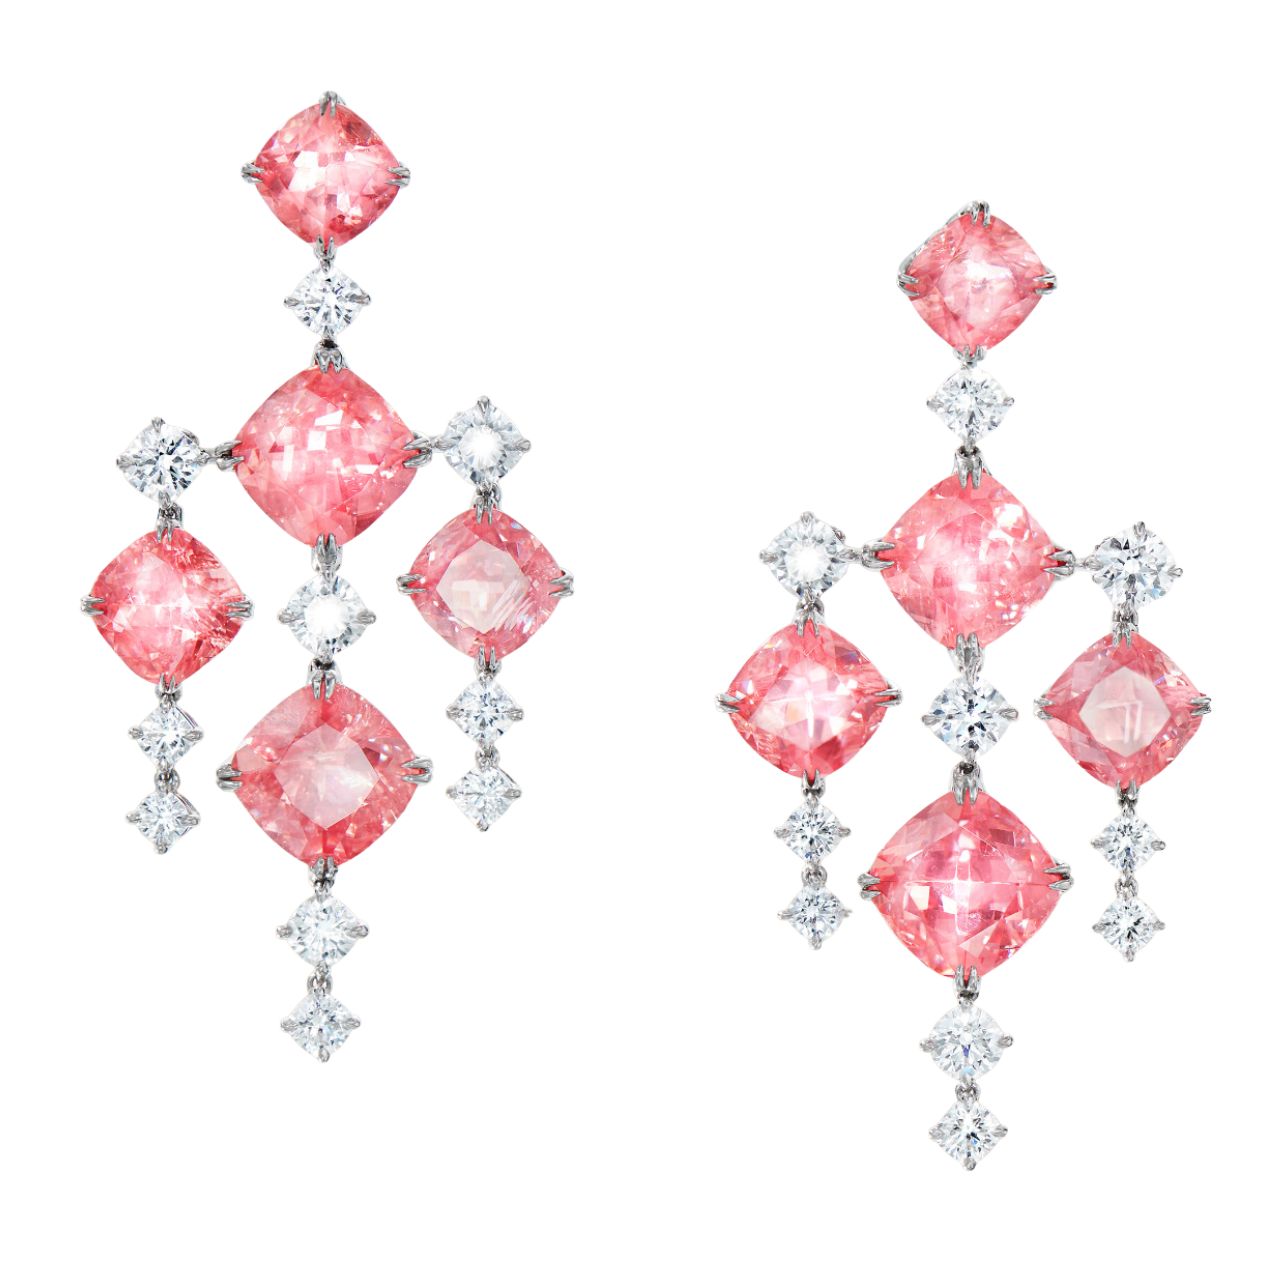 High Jewelry Lumina chandelier earrings in platinum set with rhodochrosite and diamonds.